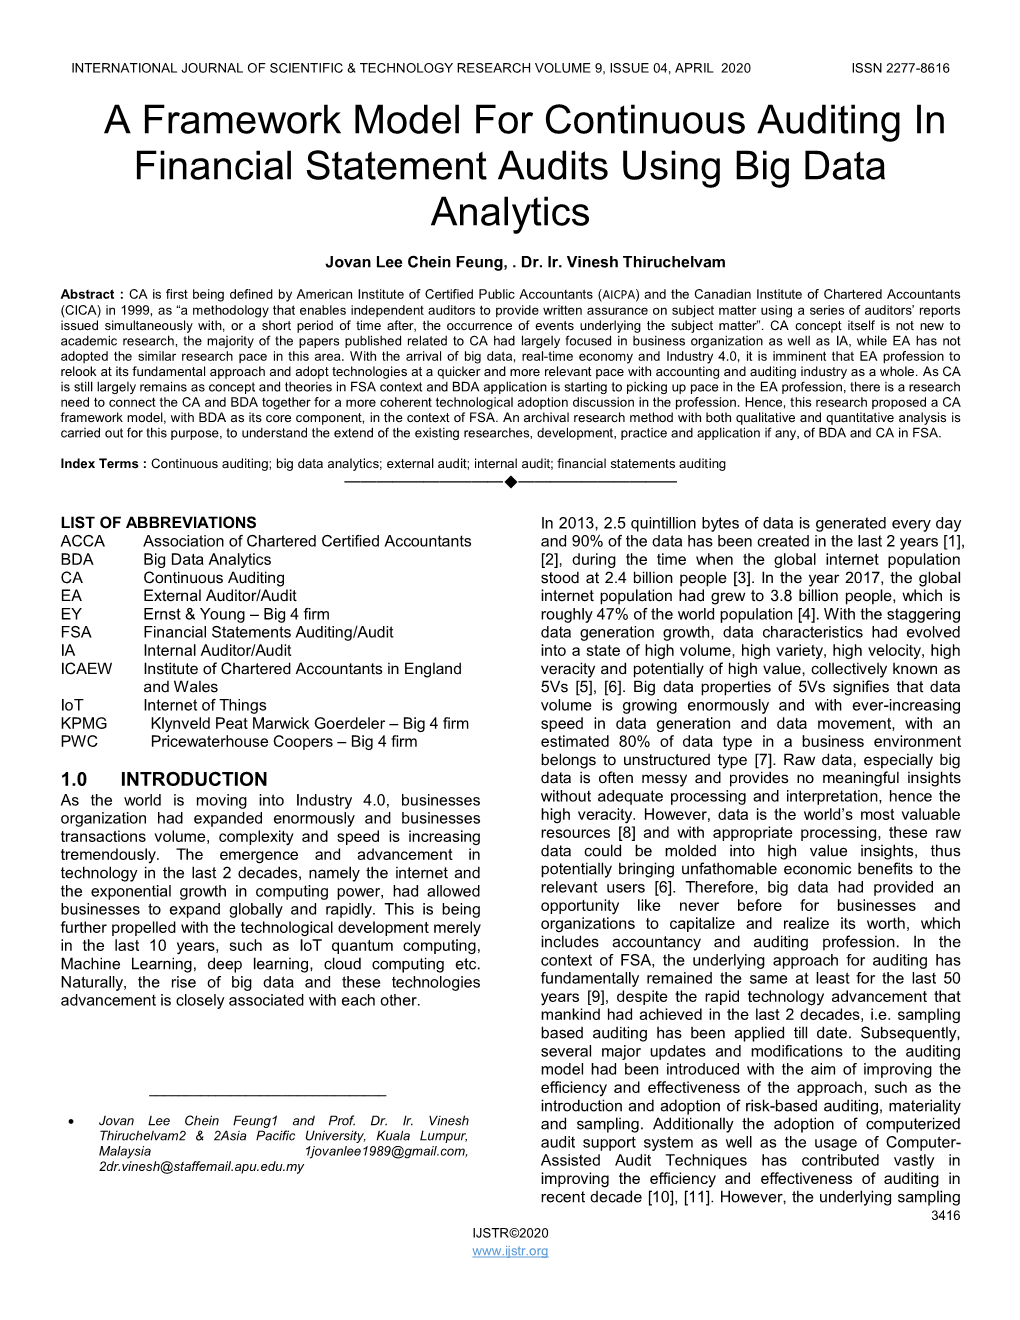 A Framework Model for Continuous Auditing in Financial Statement Audits Using Big Data Analytics